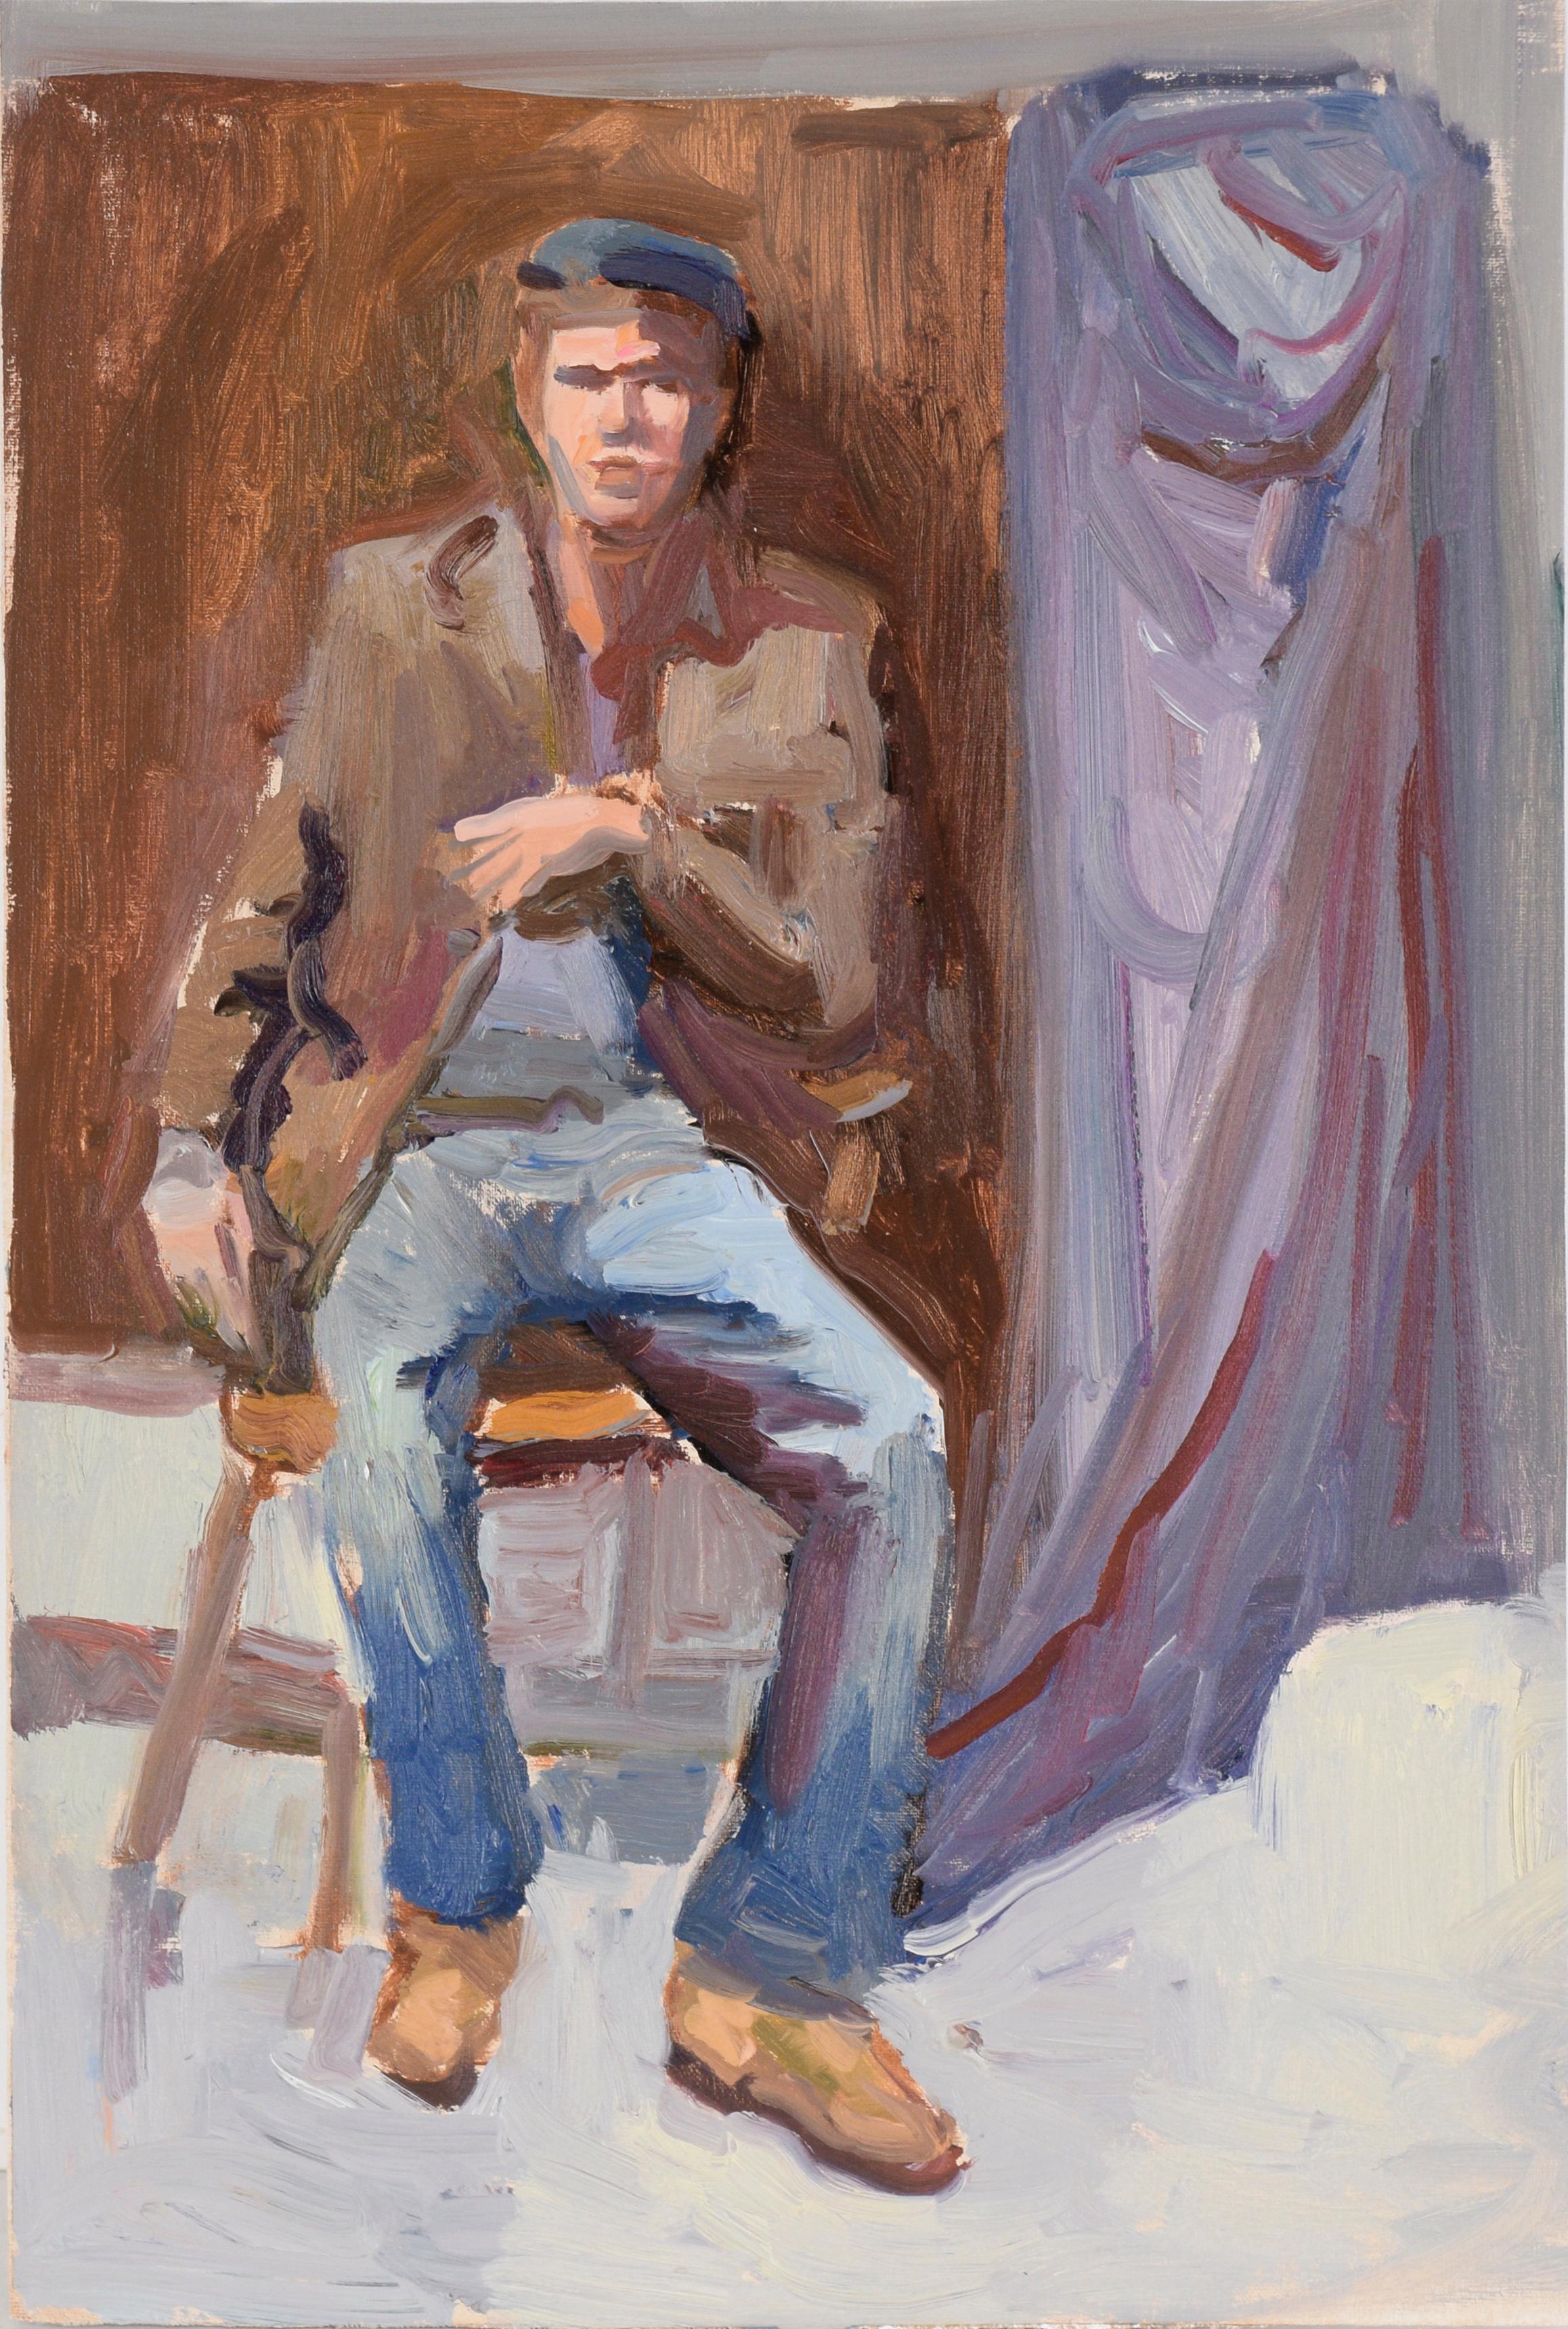 Unknown Figurative Painting - Portrait of a Seated Man in Jeans and a Sport Coat in Oil on Canvas